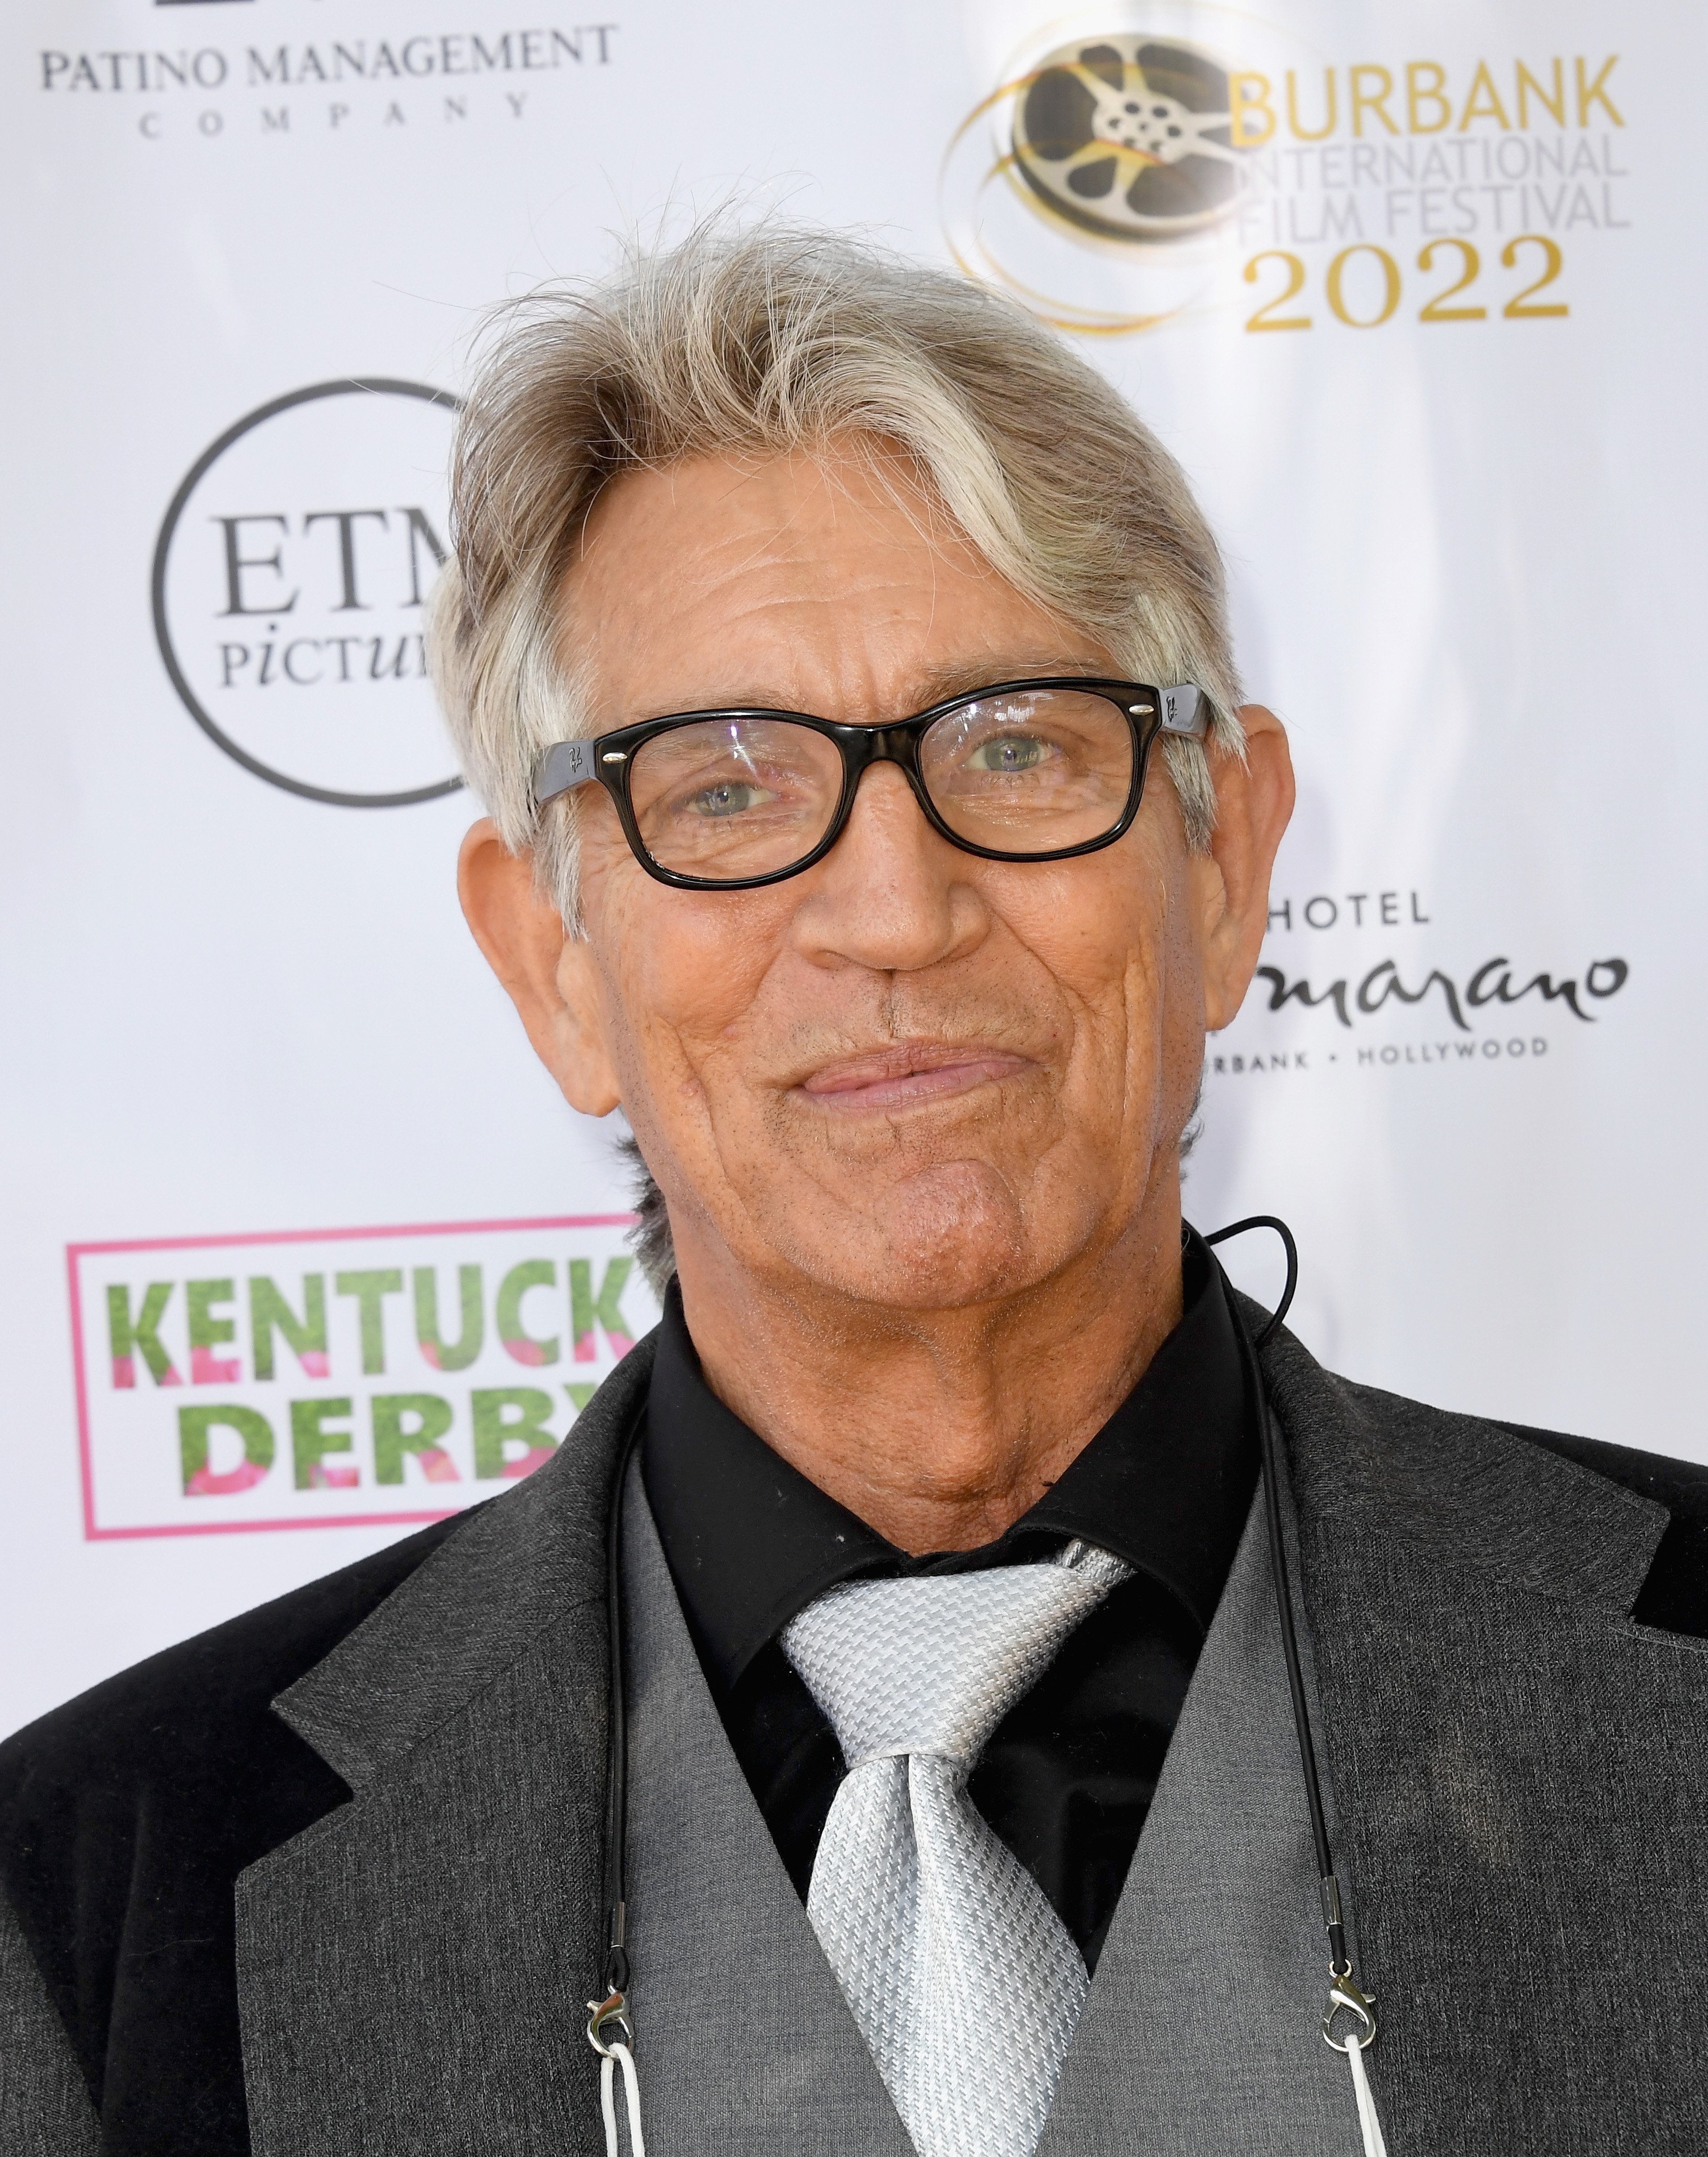 Eric Roberts attends The Burbank International Film Festival Presents Kentucky Derby Fundraiser Gala held at a Private Estate on May 7, 2022 in Beverly Hills, California | Source: Getty Images